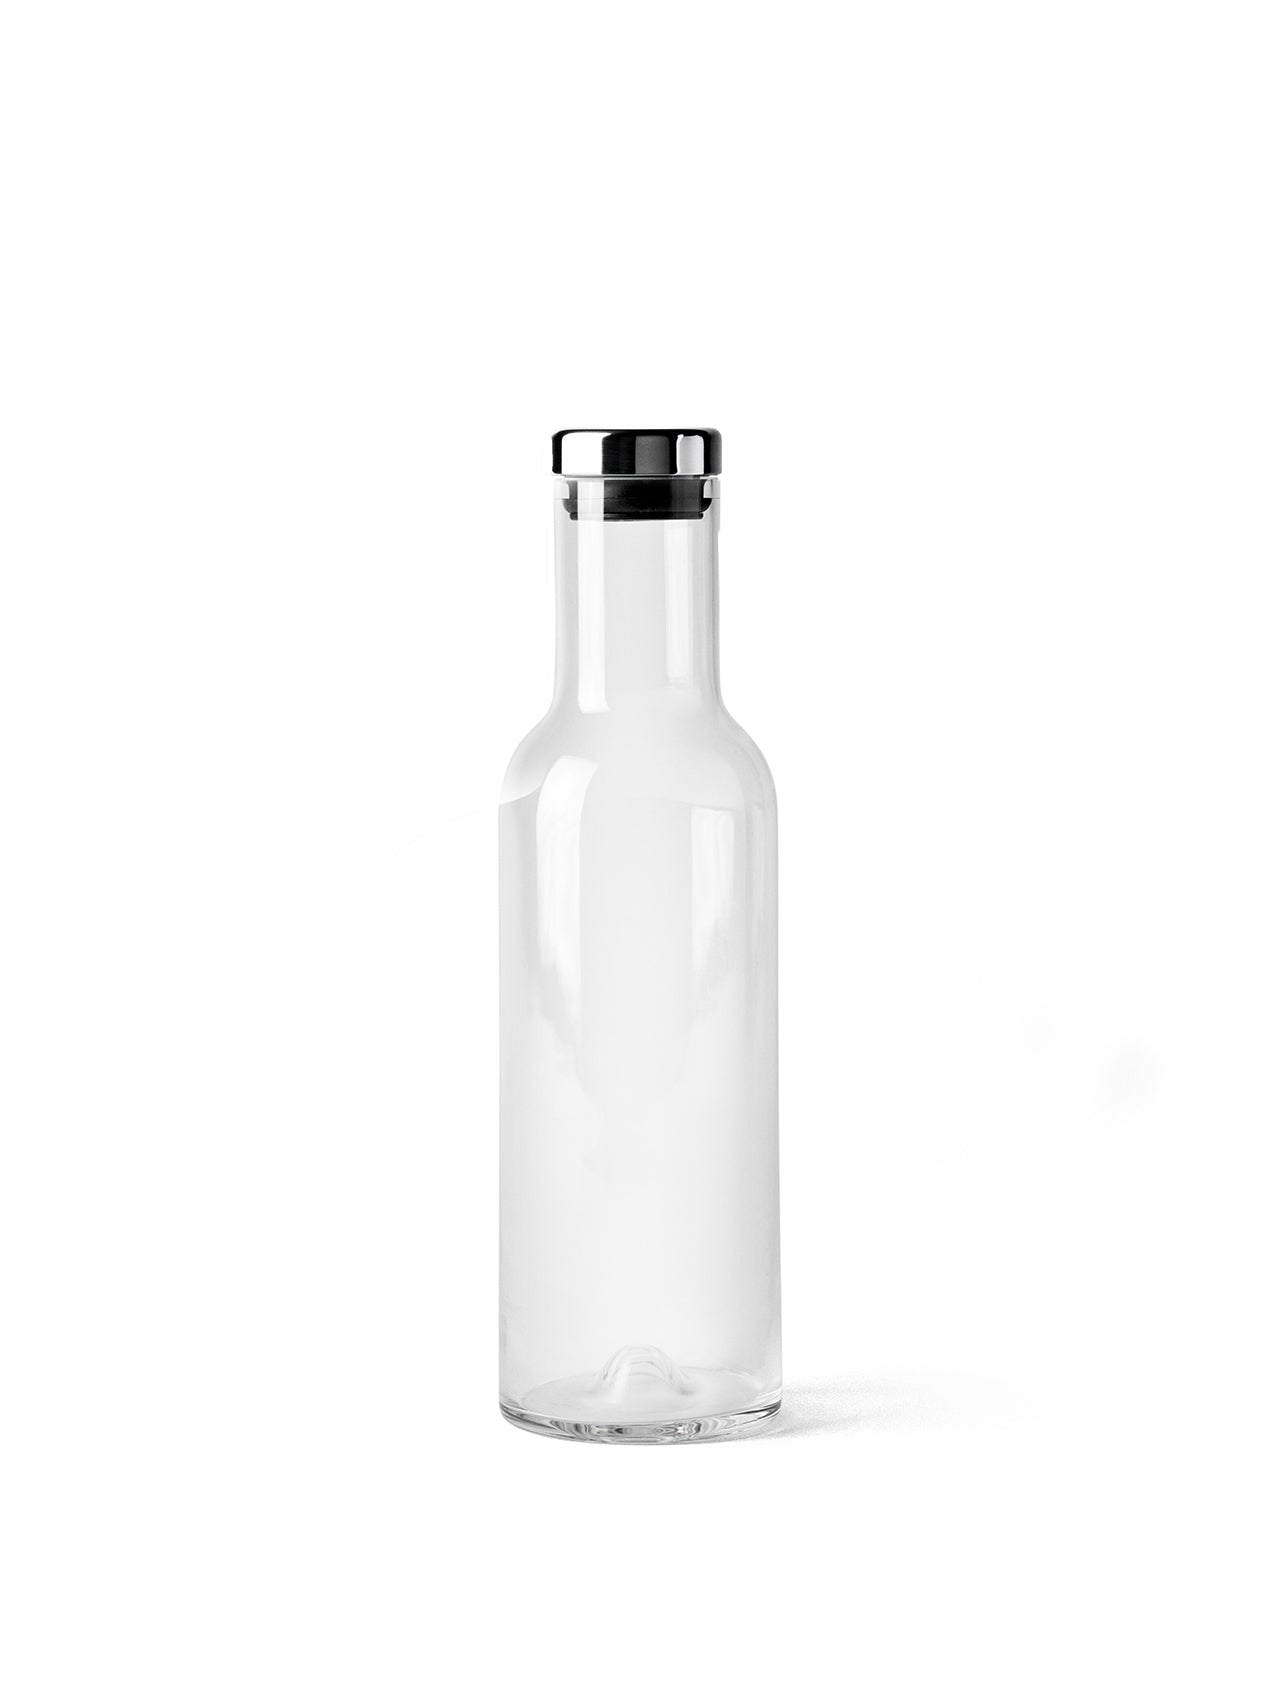 Water Fall Glass Carafe 34oz by Kor Water